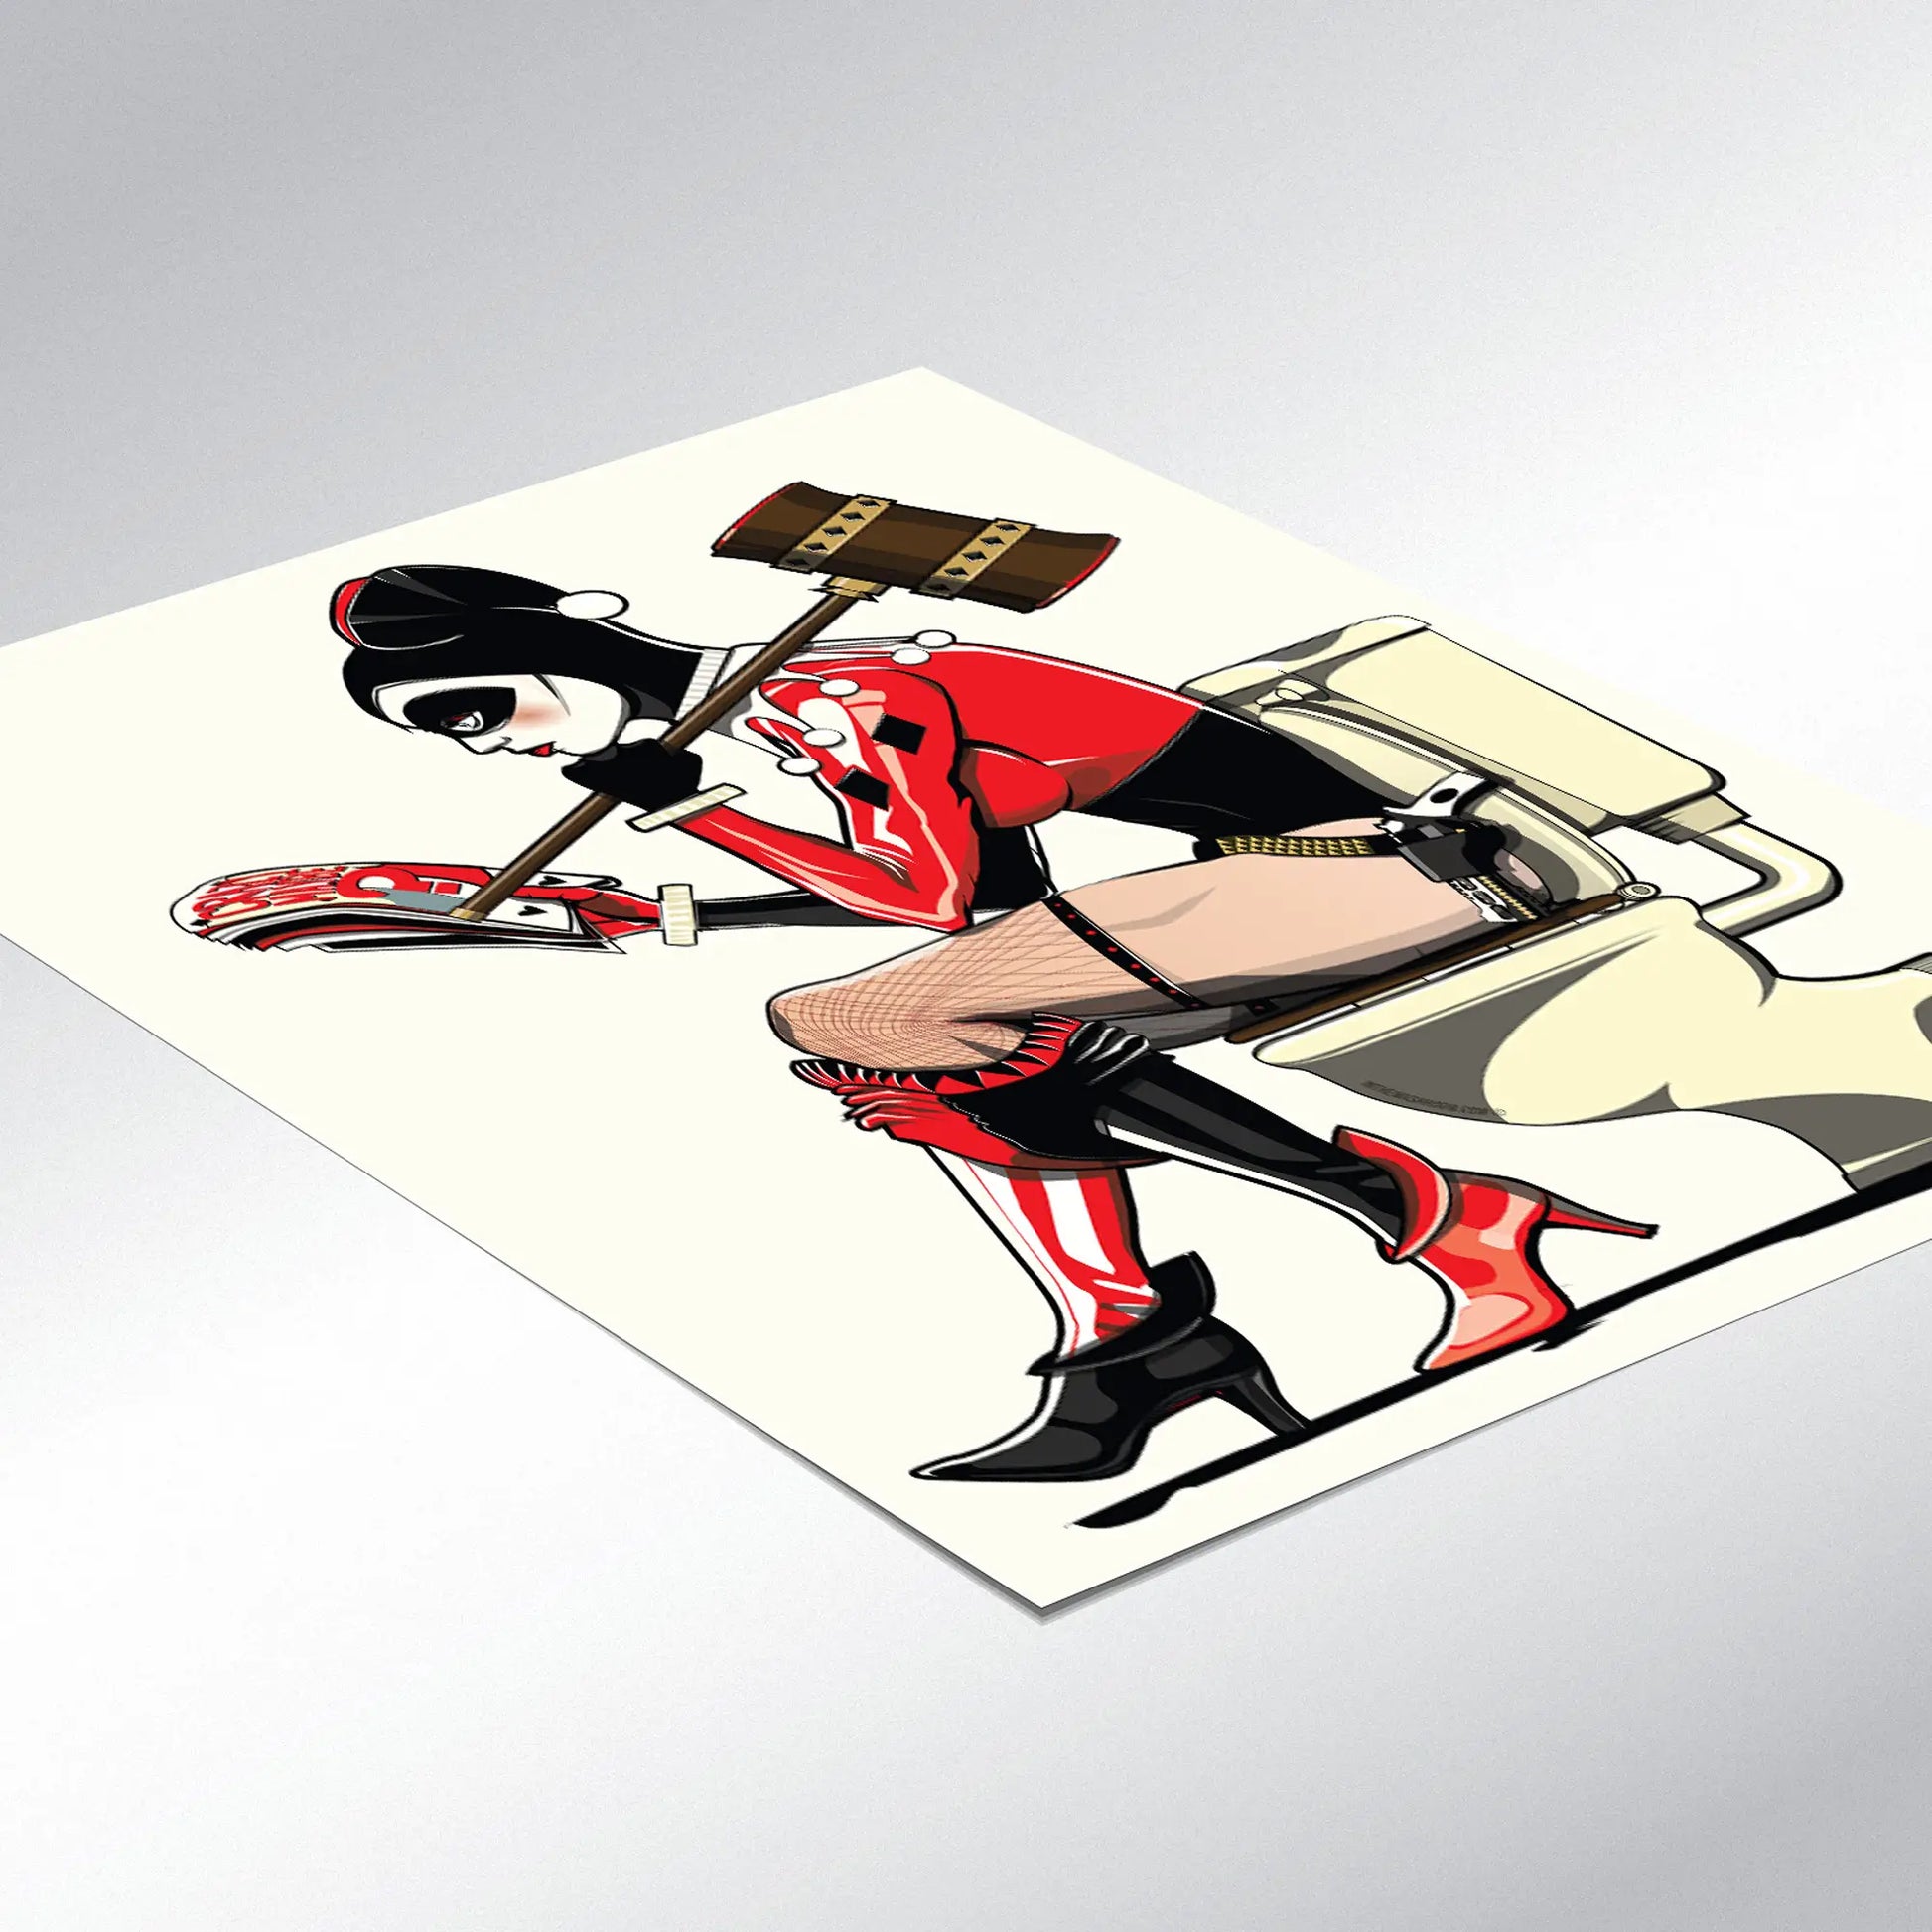 Funny Art Print of Harley Quinn on the Toilet: 12in x 16in Unframed